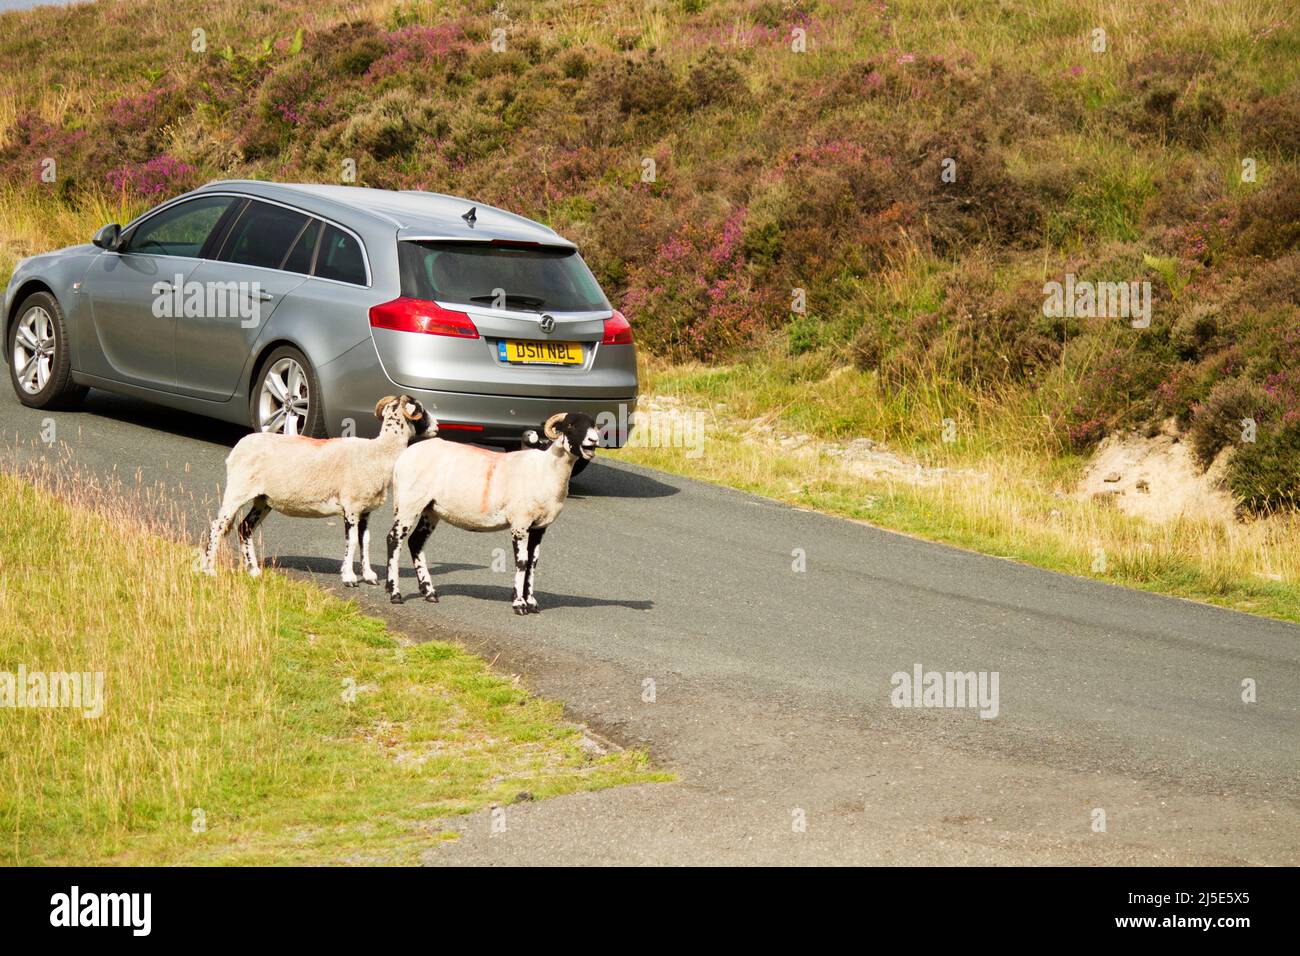 Sheep on the moorland road at Rosedale Yorkshire. Speeing car behind them. Stock Photo